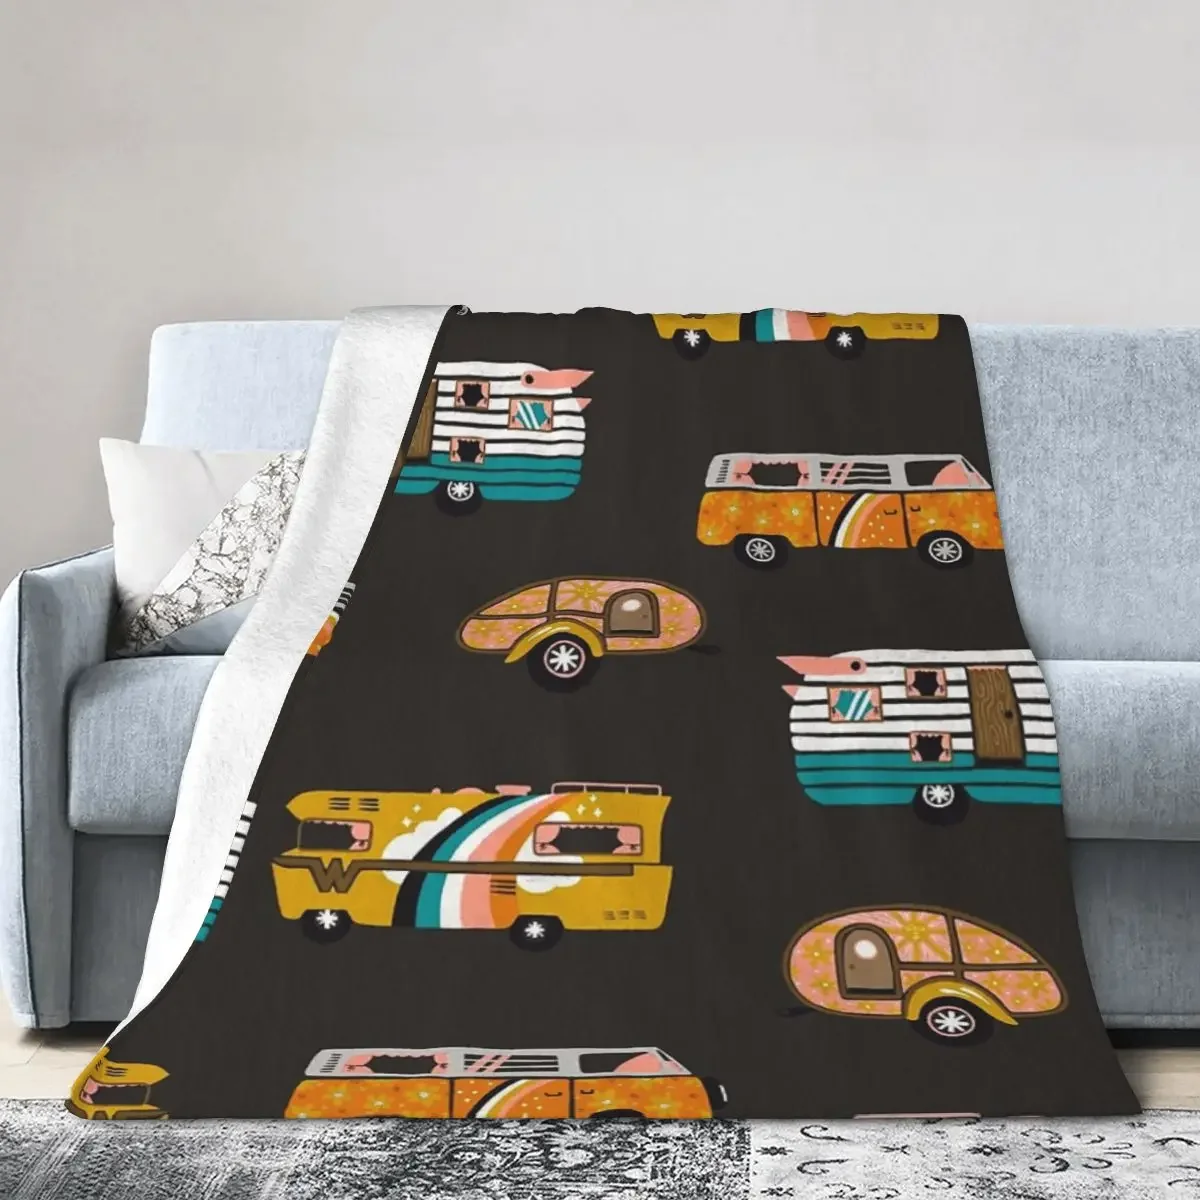 

Throw Blanket Retro Road Trip Charcoal Blankets Soft Bedding Warm Plush Blanket for Bed Living room Picnic Travel Home Sofa